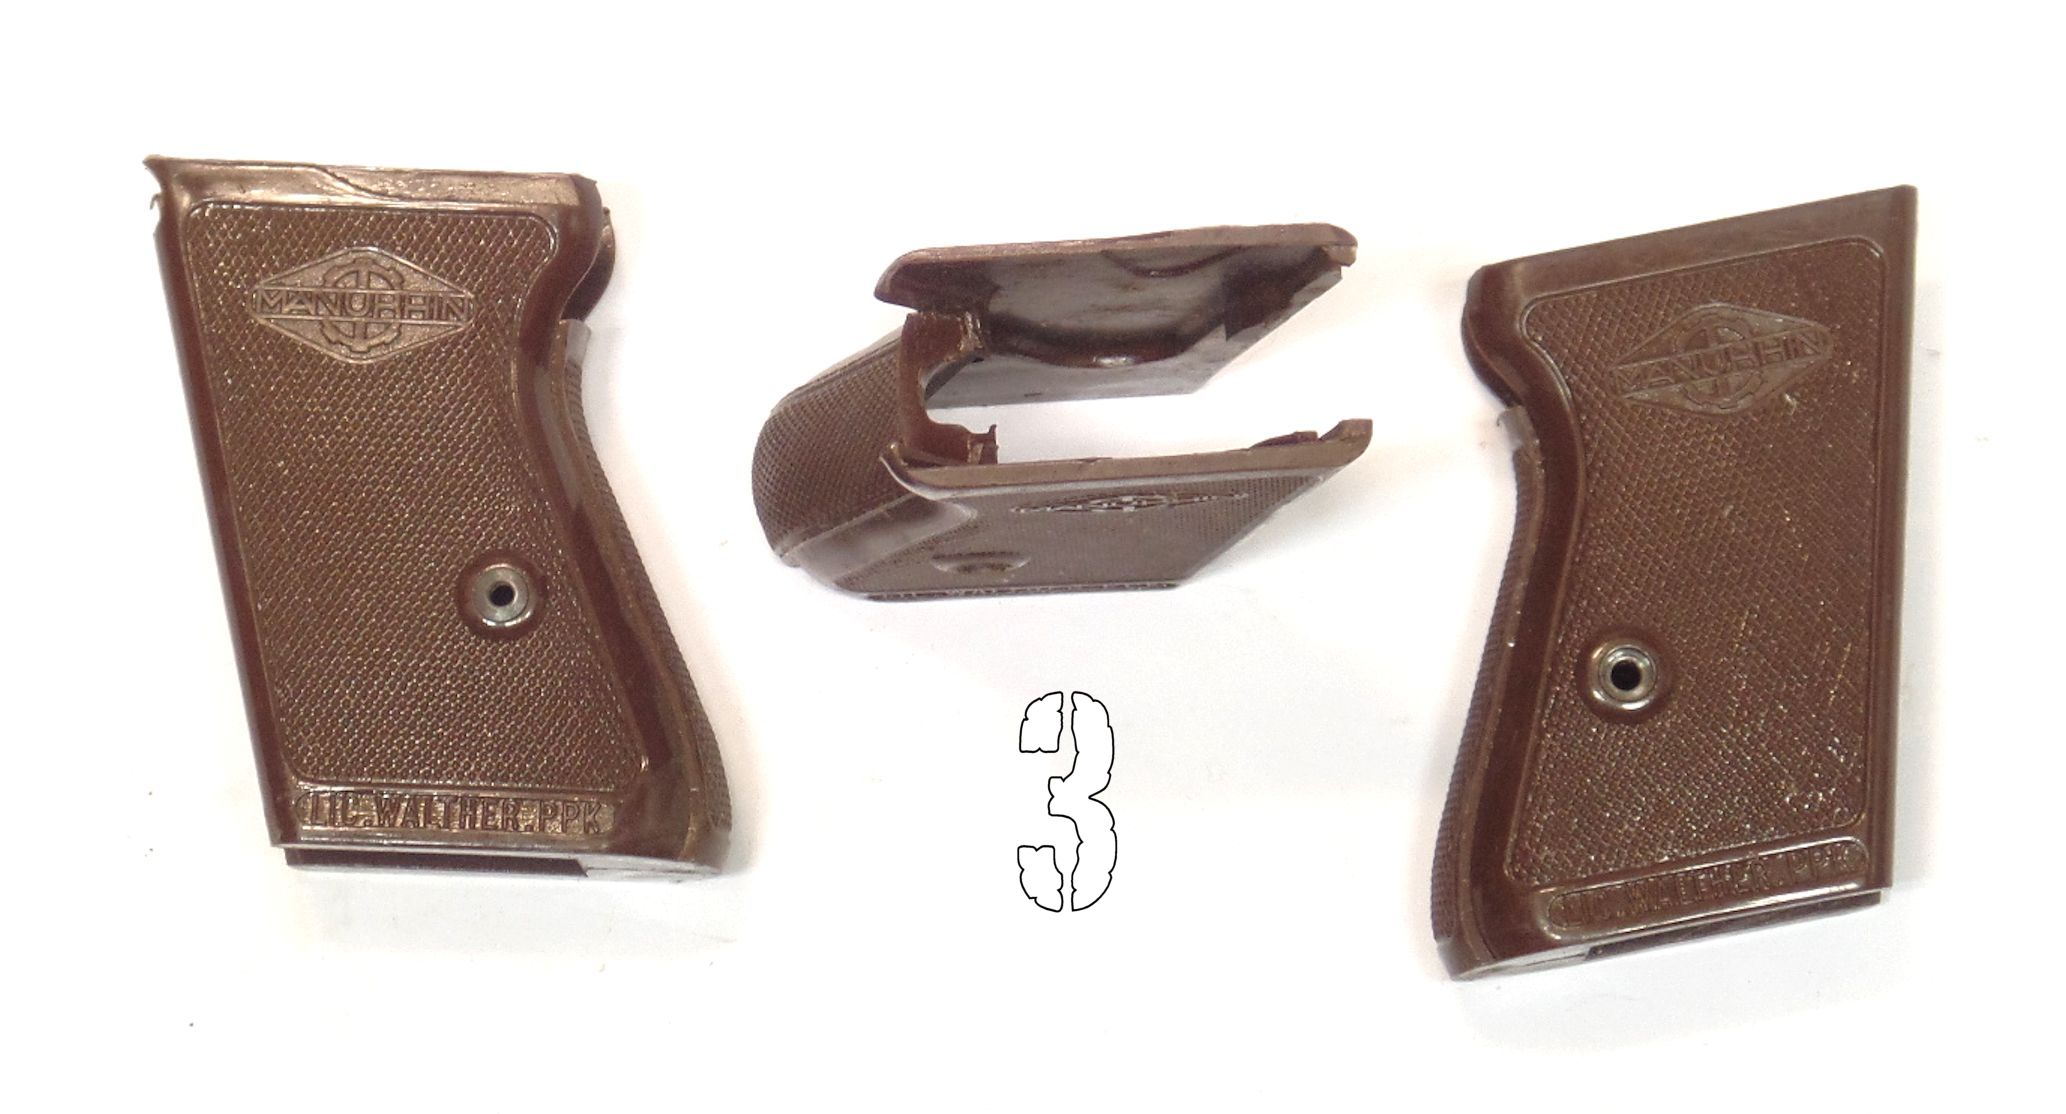 Plaquettes Walther PP / PPK